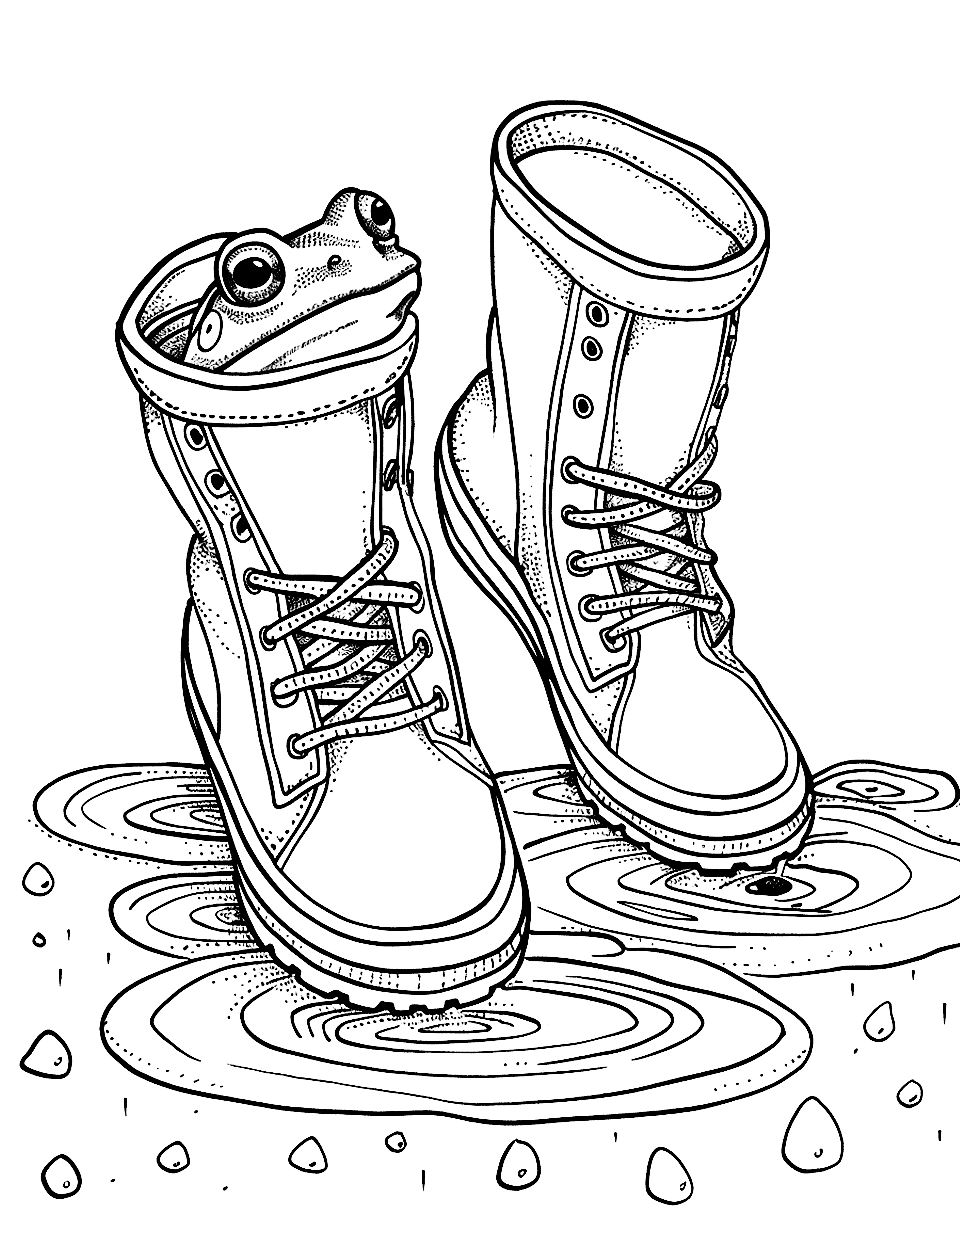 Frog and Rain Boots Shoe Coloring Page - A cheerful frog peering out from a pair of rain boots amidst puddles.